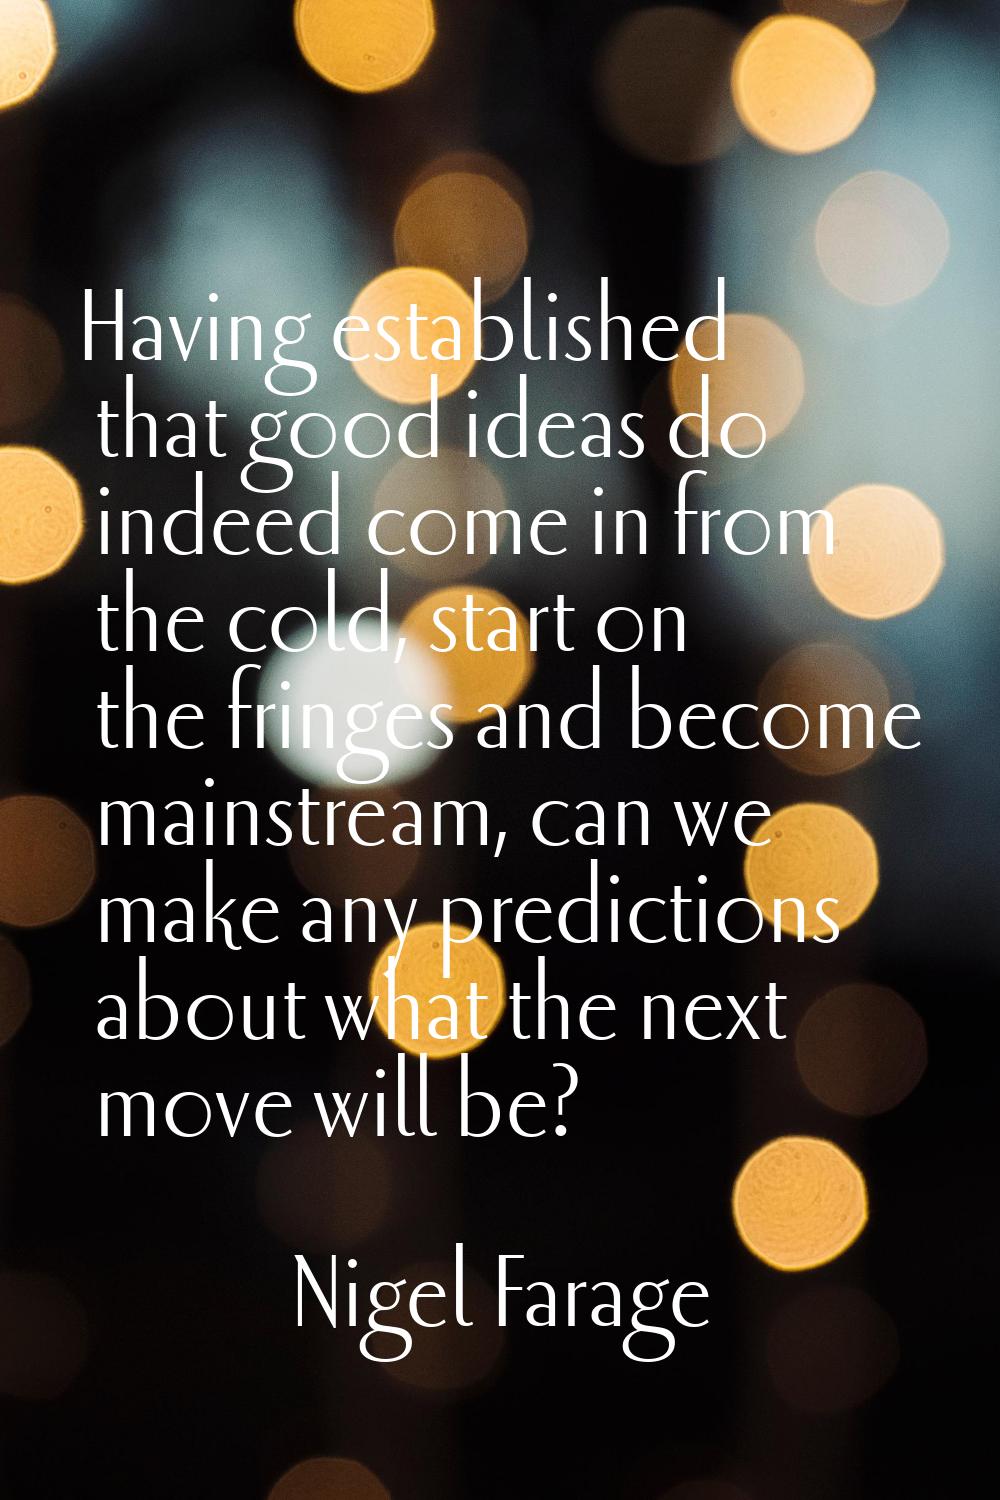 Having established that good ideas do indeed come in from the cold, start on the fringes and become